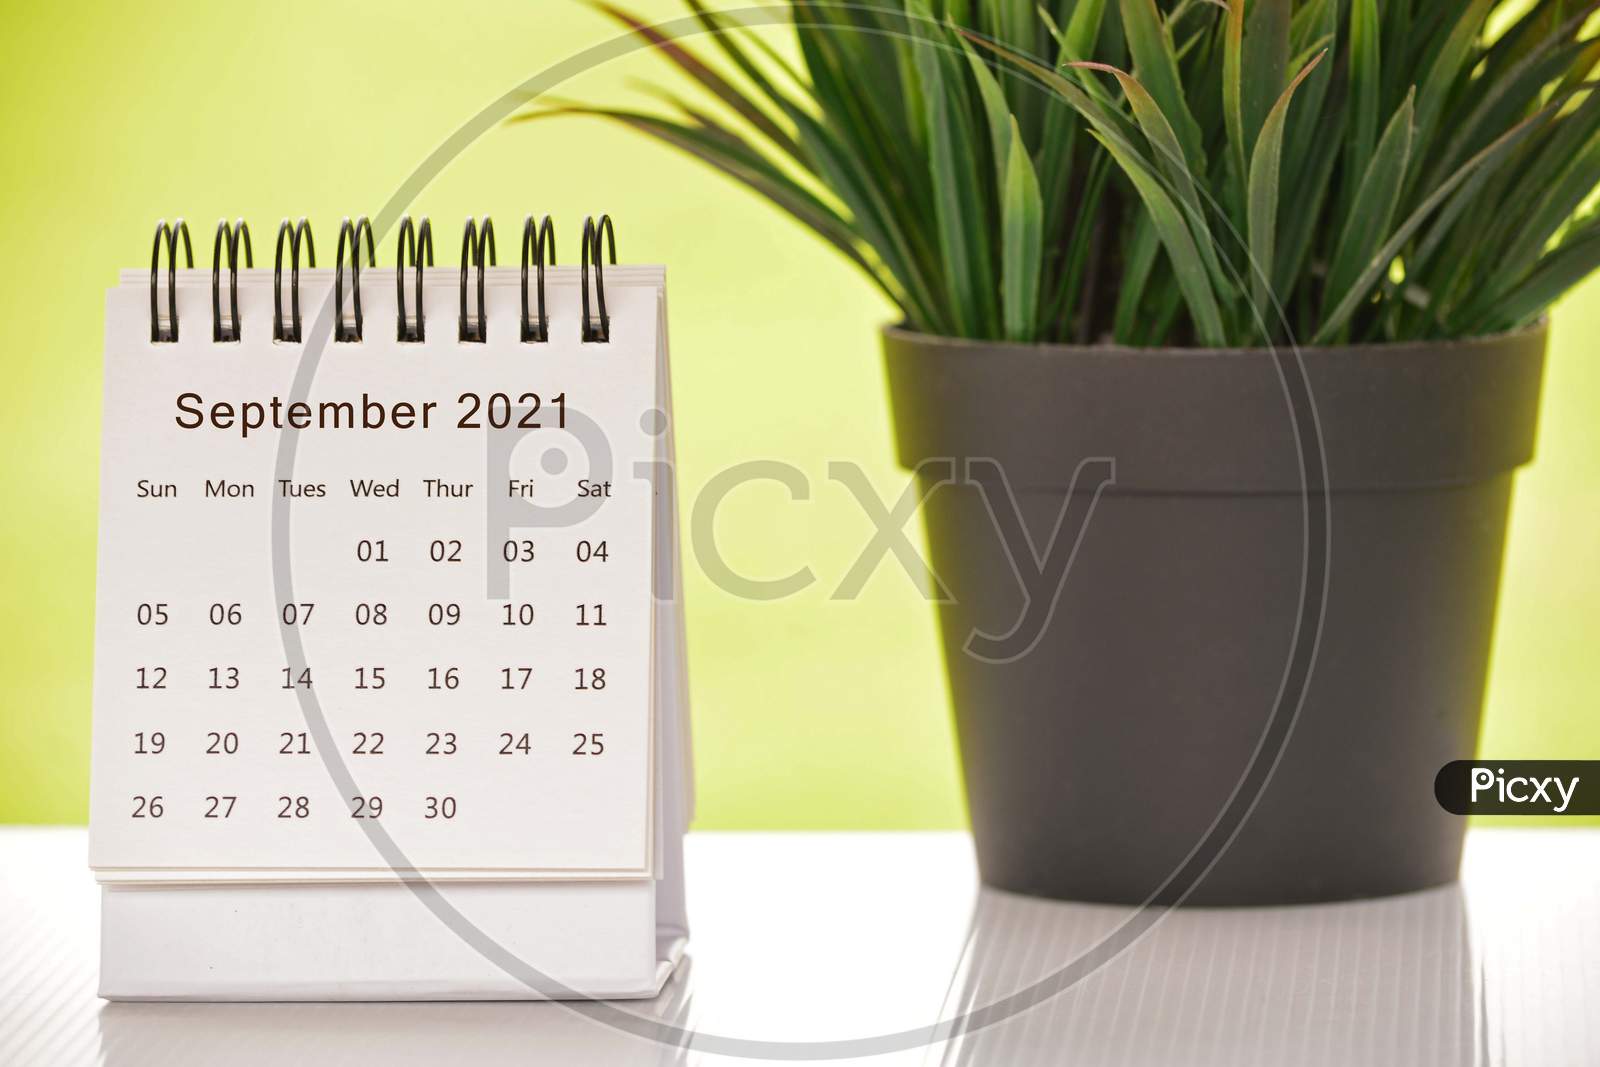 White September 2021 Calendar With Green Backgrounds And Potted Plant. 2021 New Year Concept